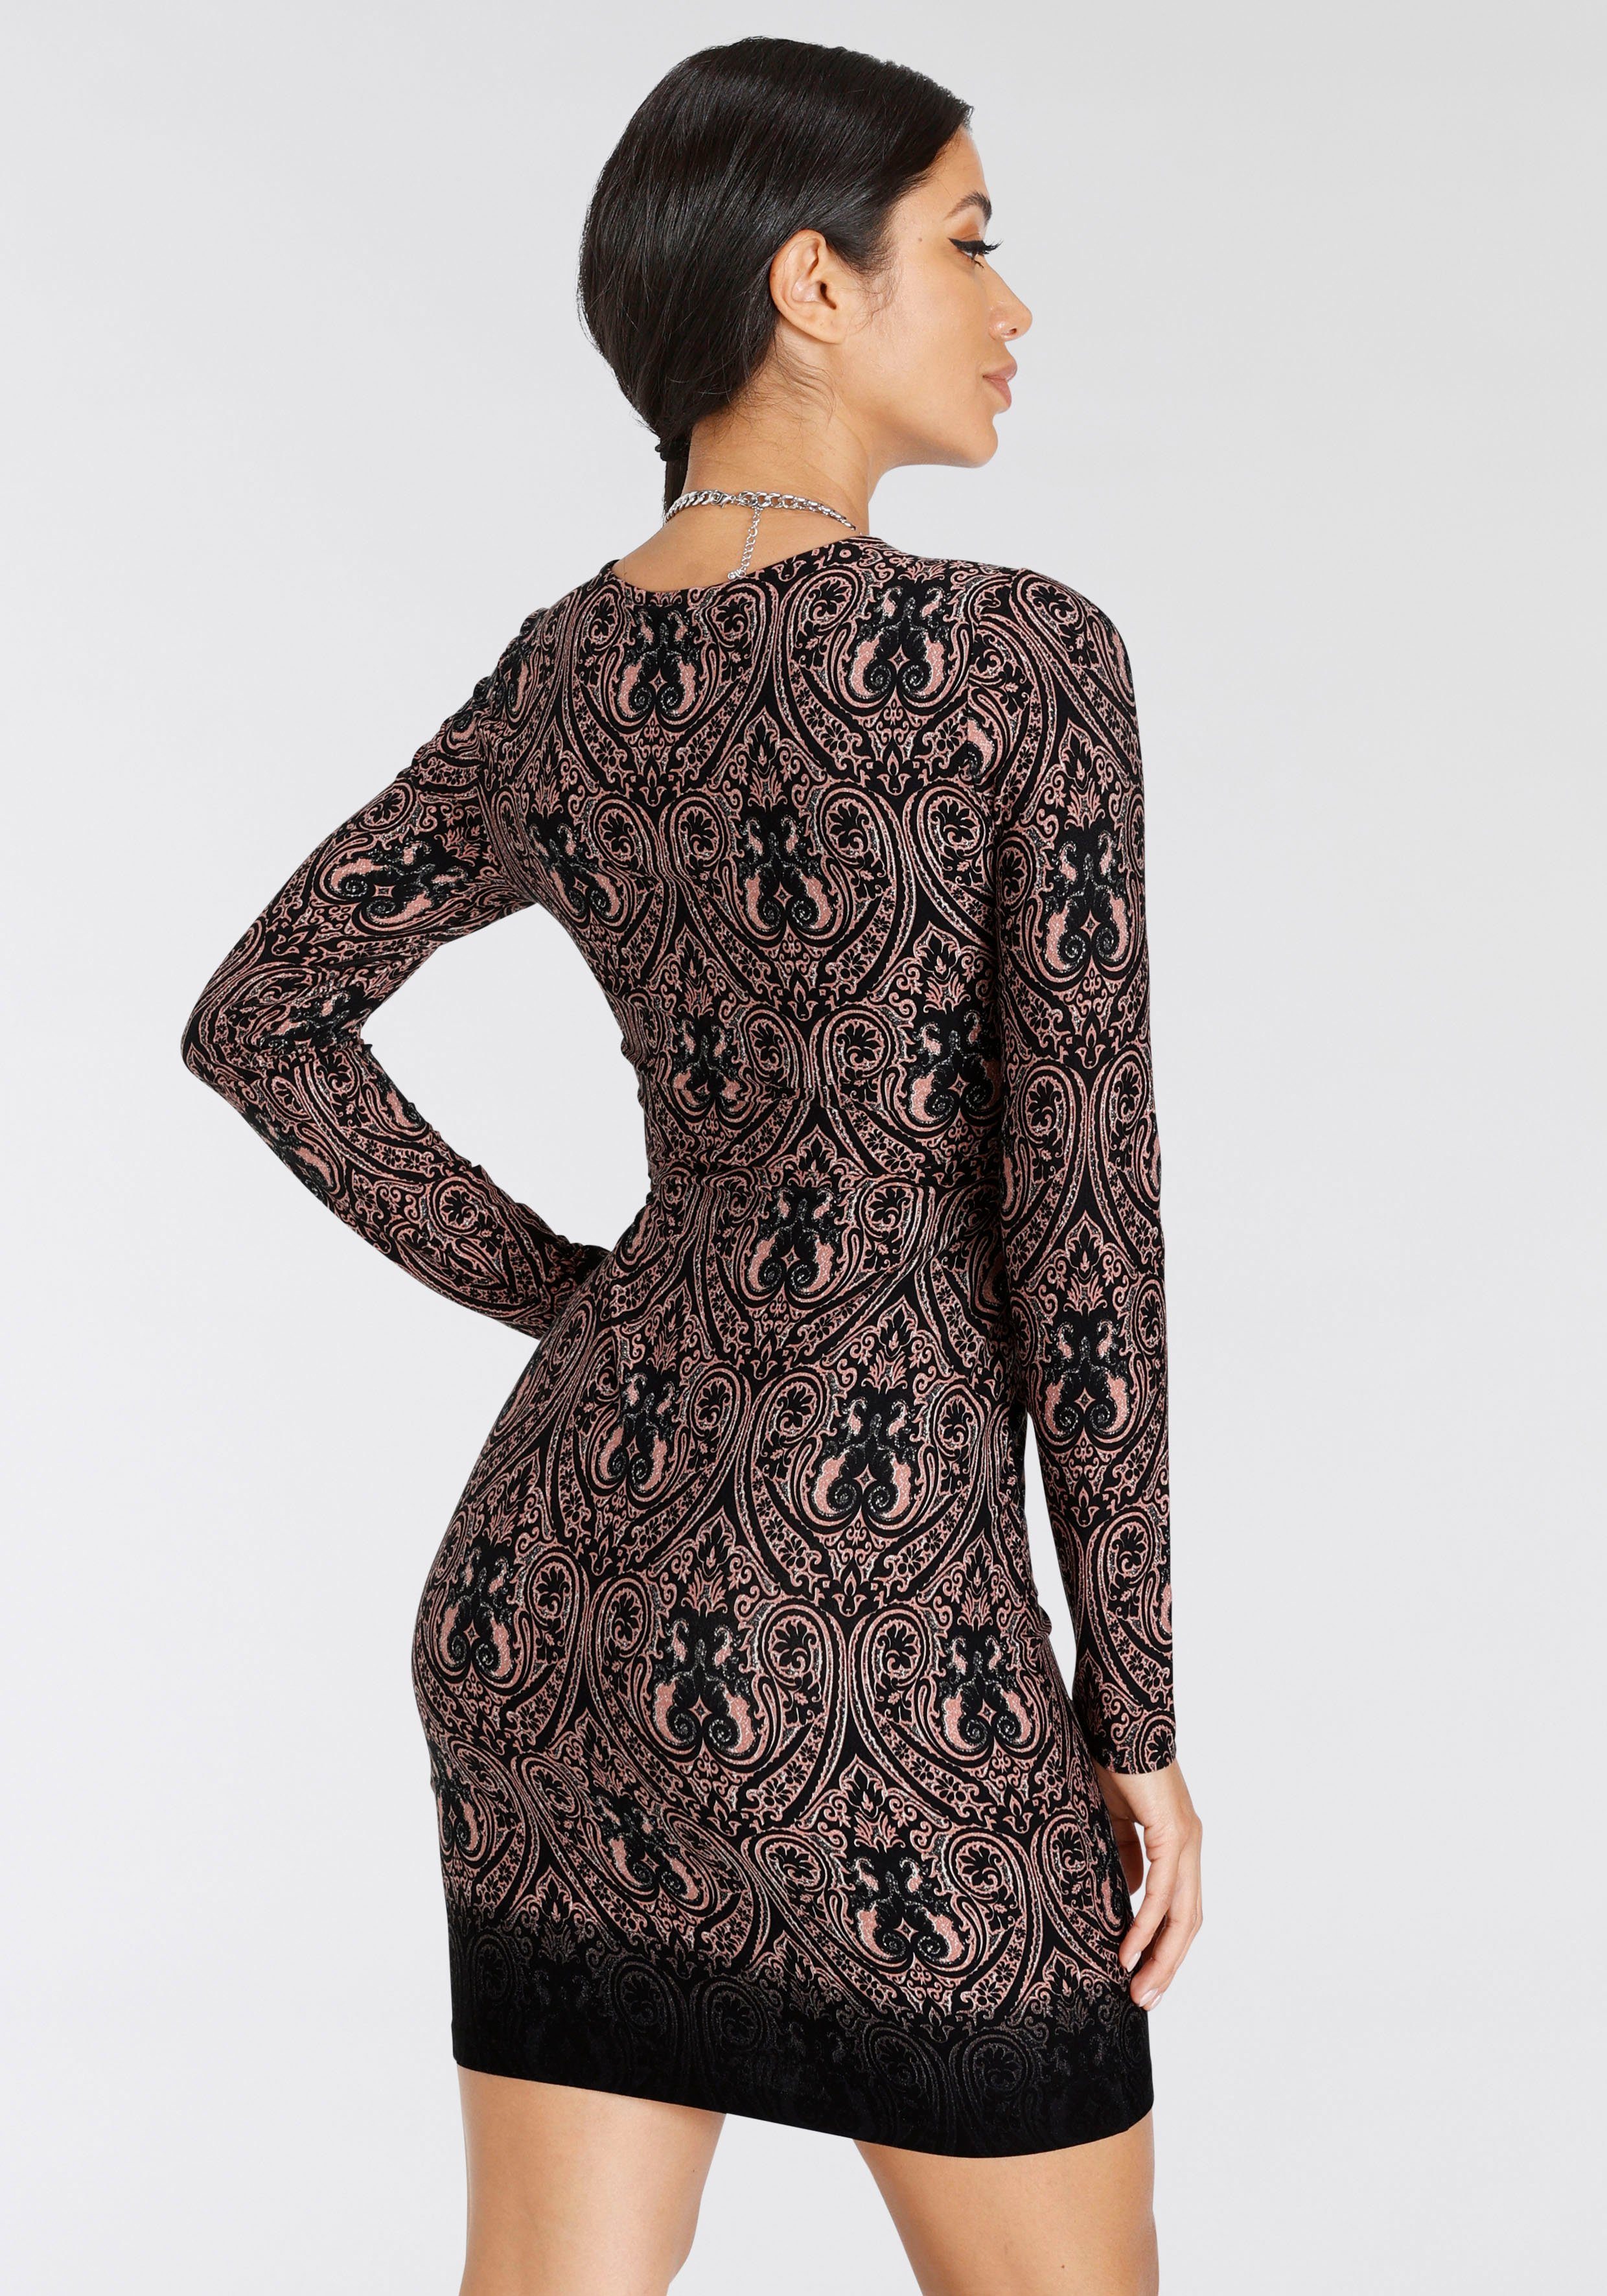 Paisley-Muster Cut-Out mit Jerseykleid Melrose und